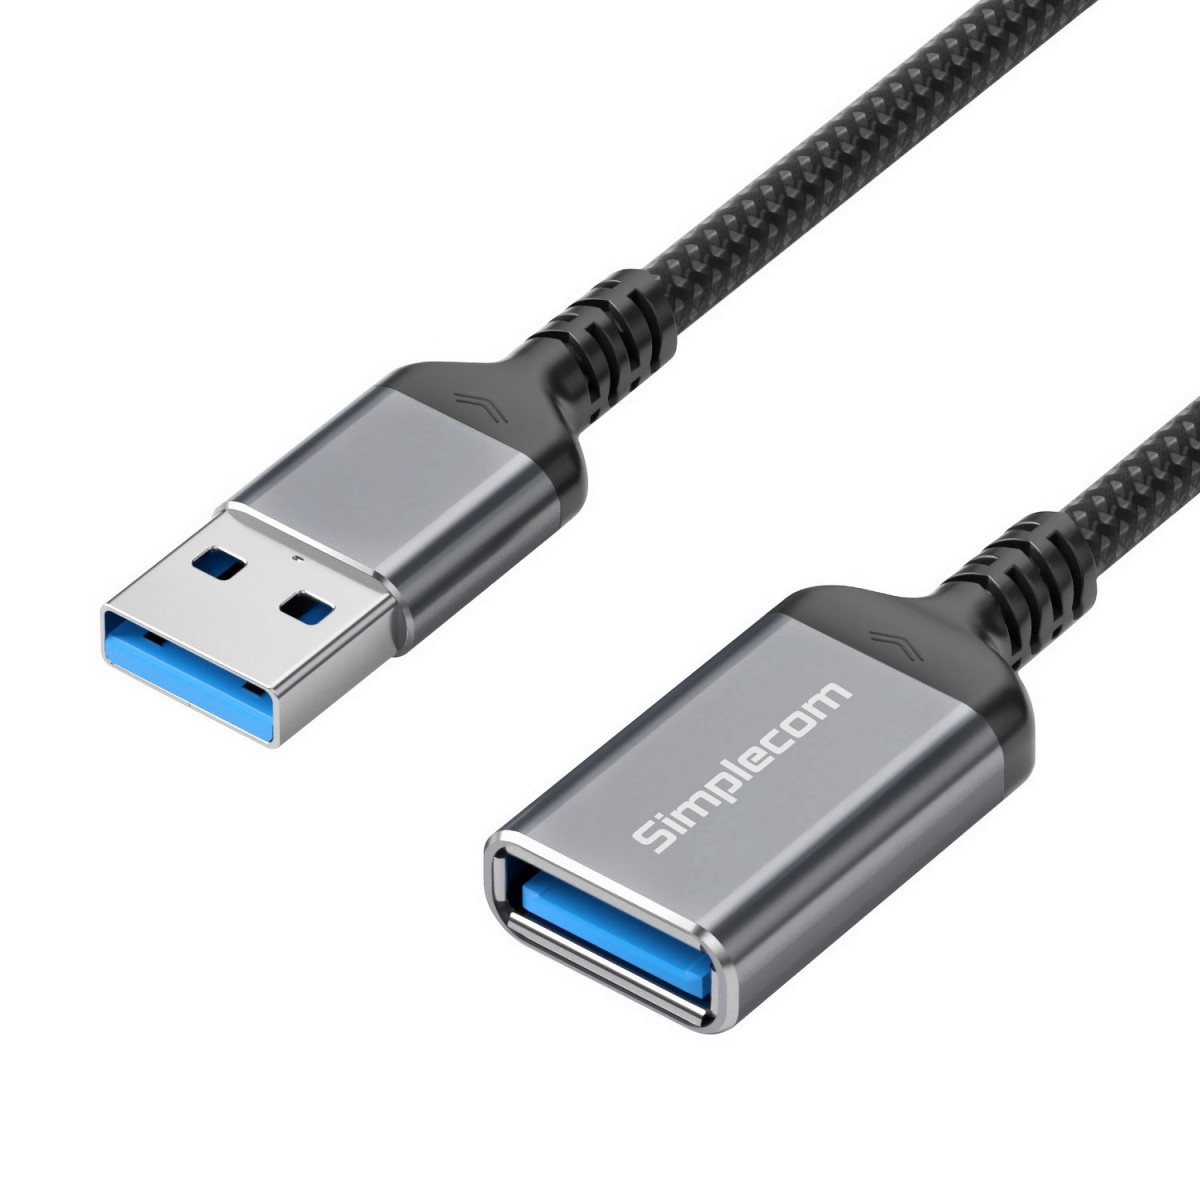  USB 3.0 Extension Cable USB-A Male to USB-A Female Nylon Braided 2.0M  